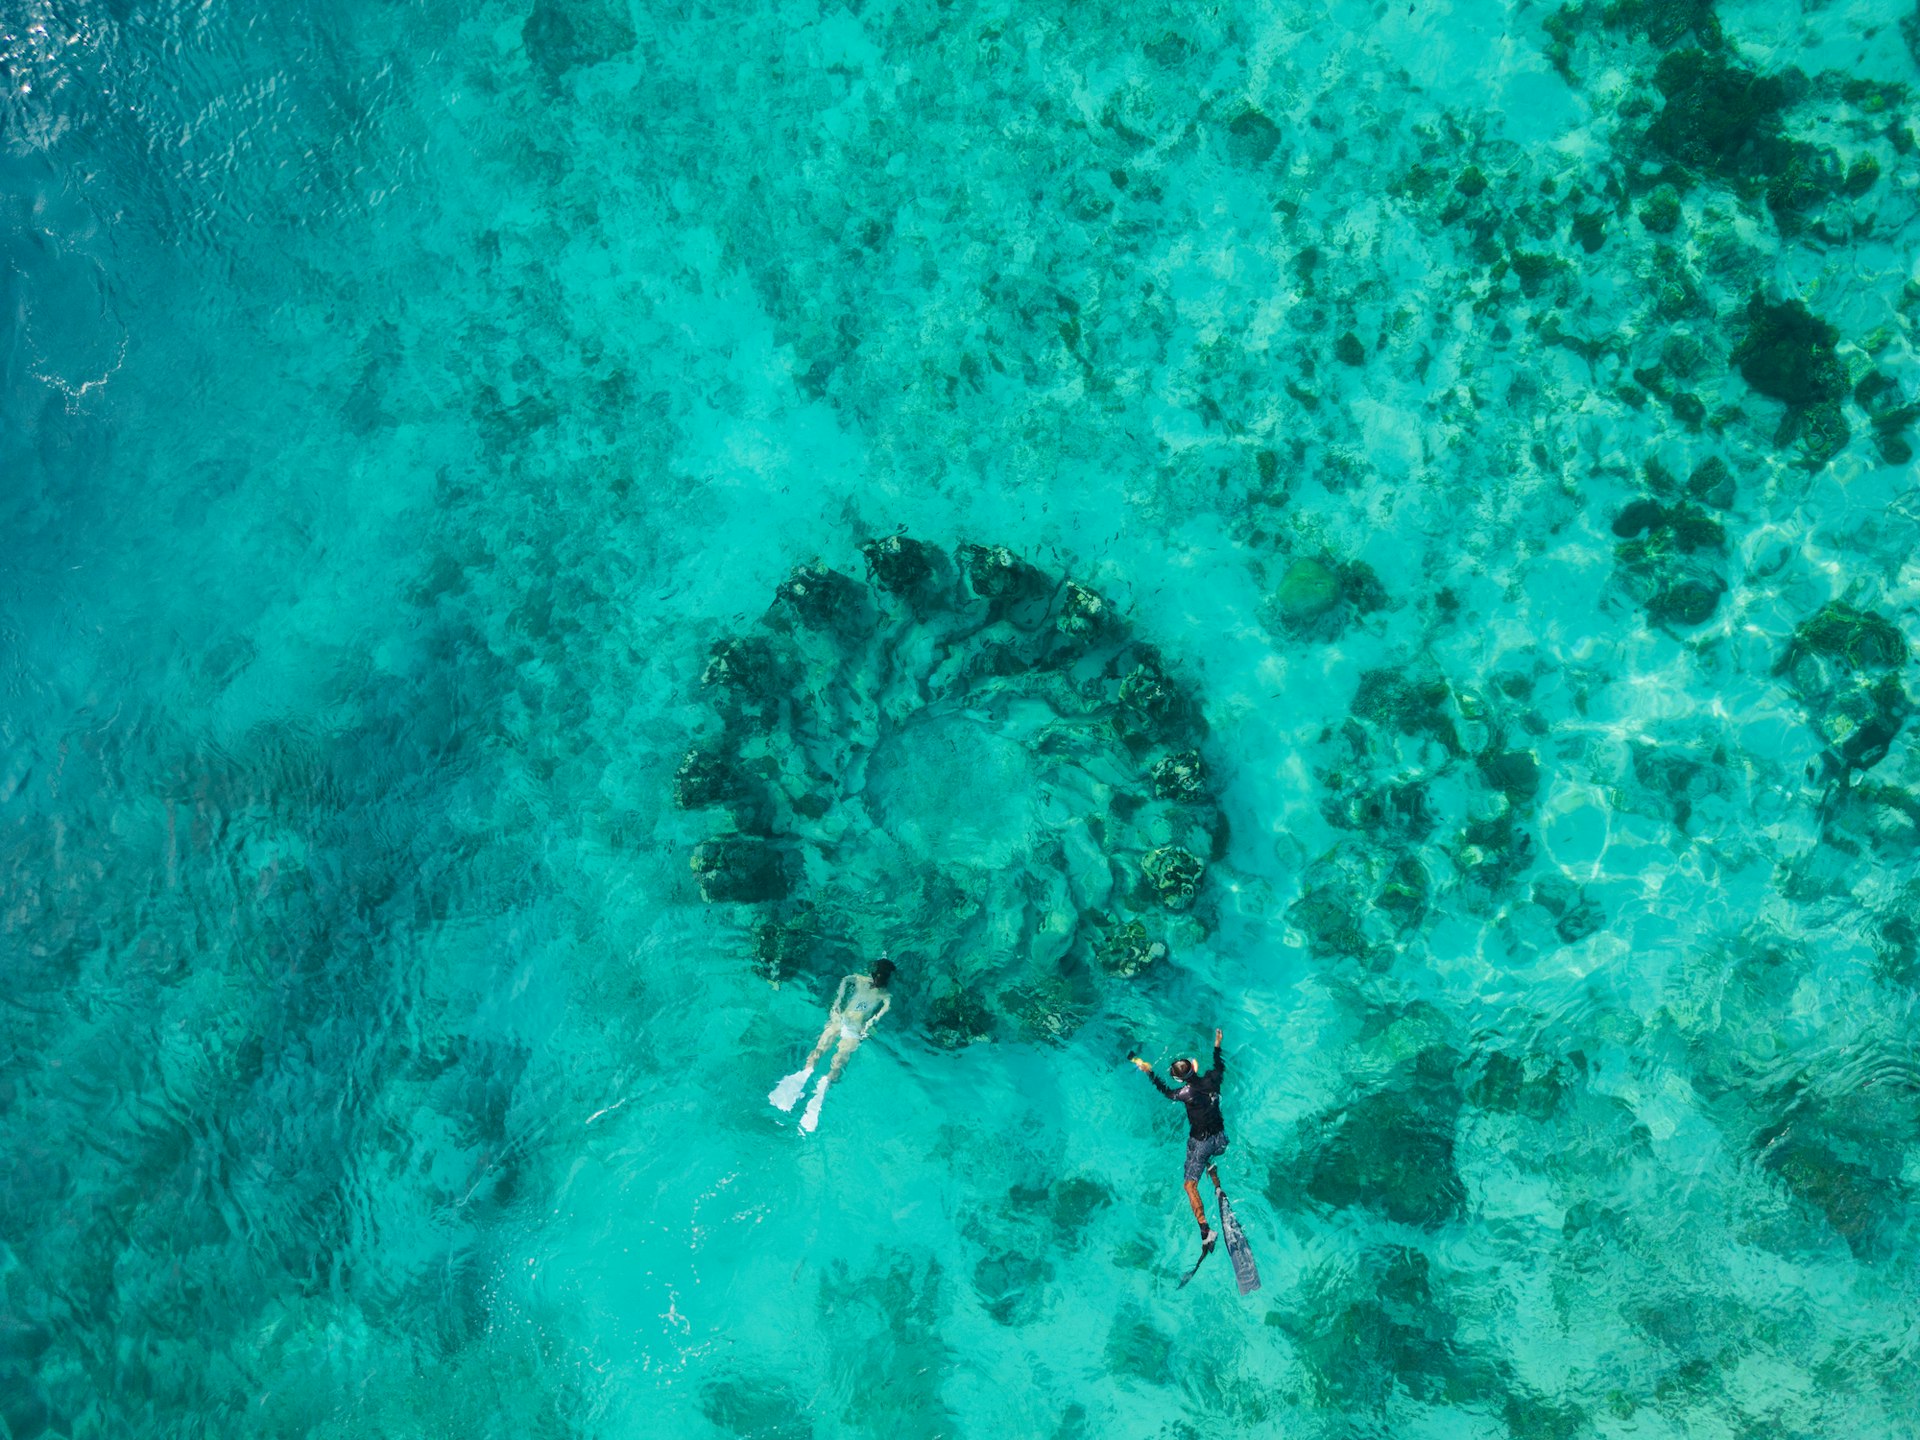 A couple snorkel in clear turquoise waters above an underwater sculpture of figures standing in a circle